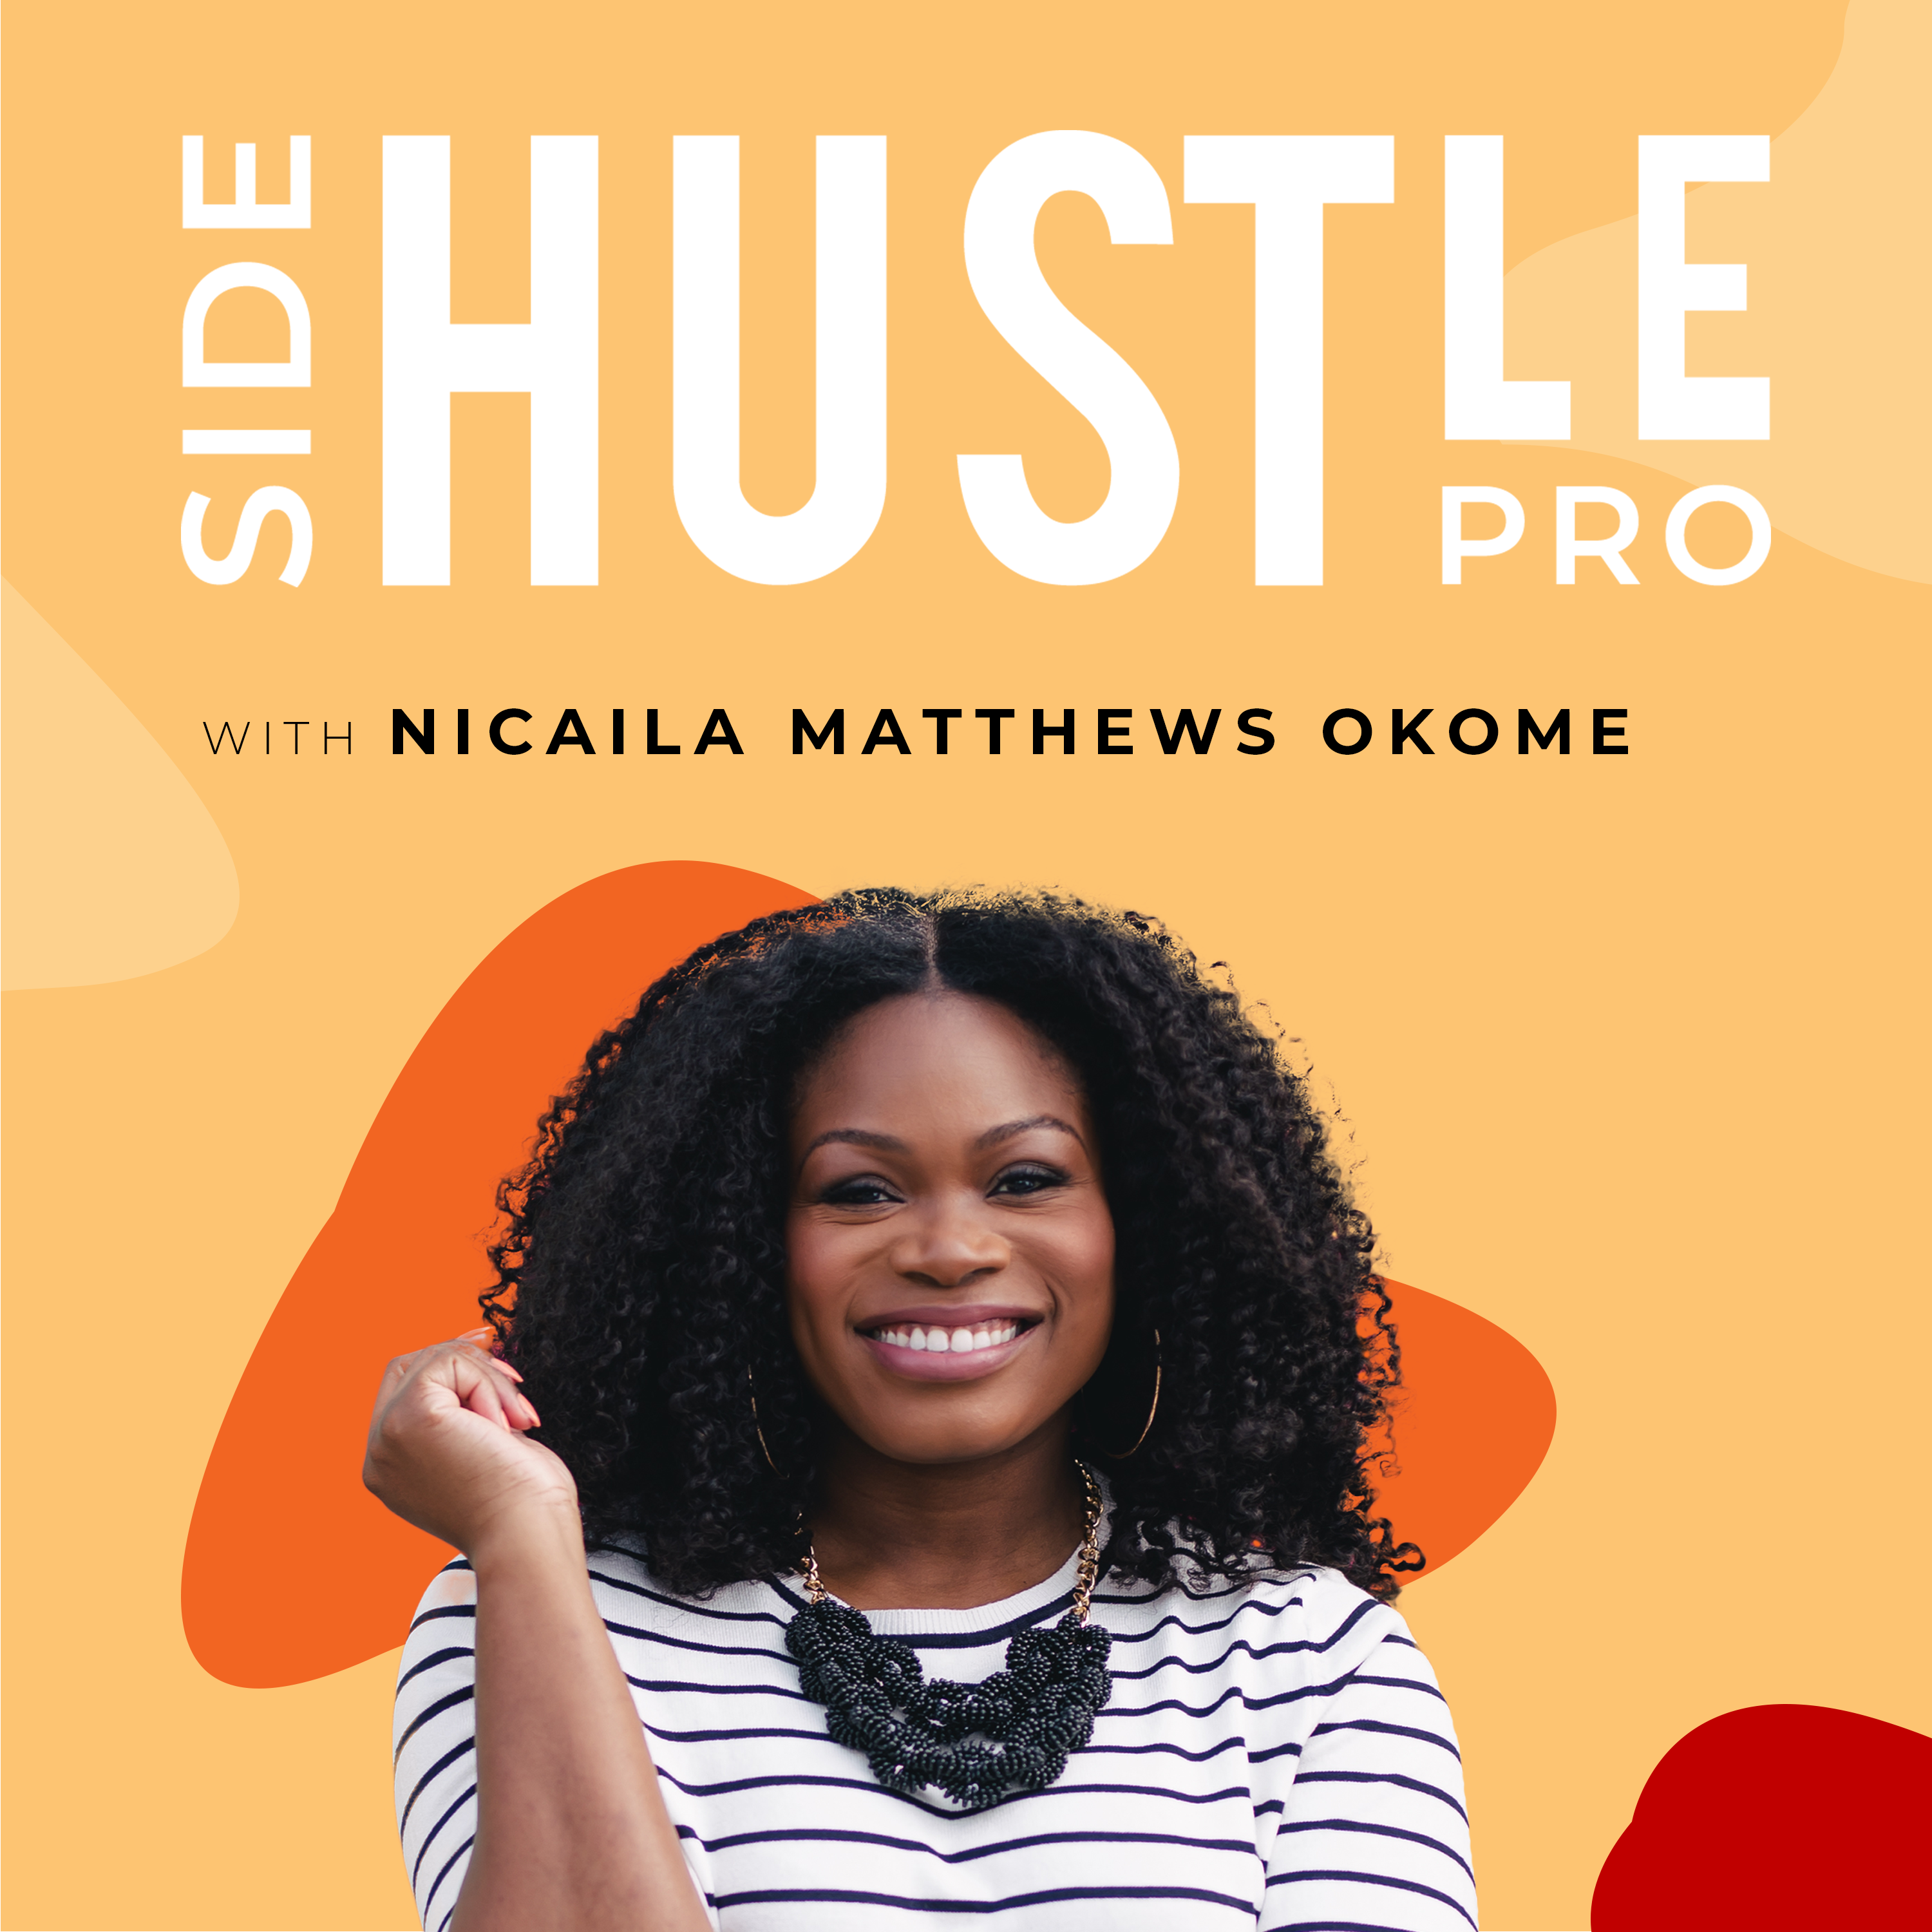 218: How Arsha Jones Started An ECommerce Empire with Less Than $100 (REWIND)